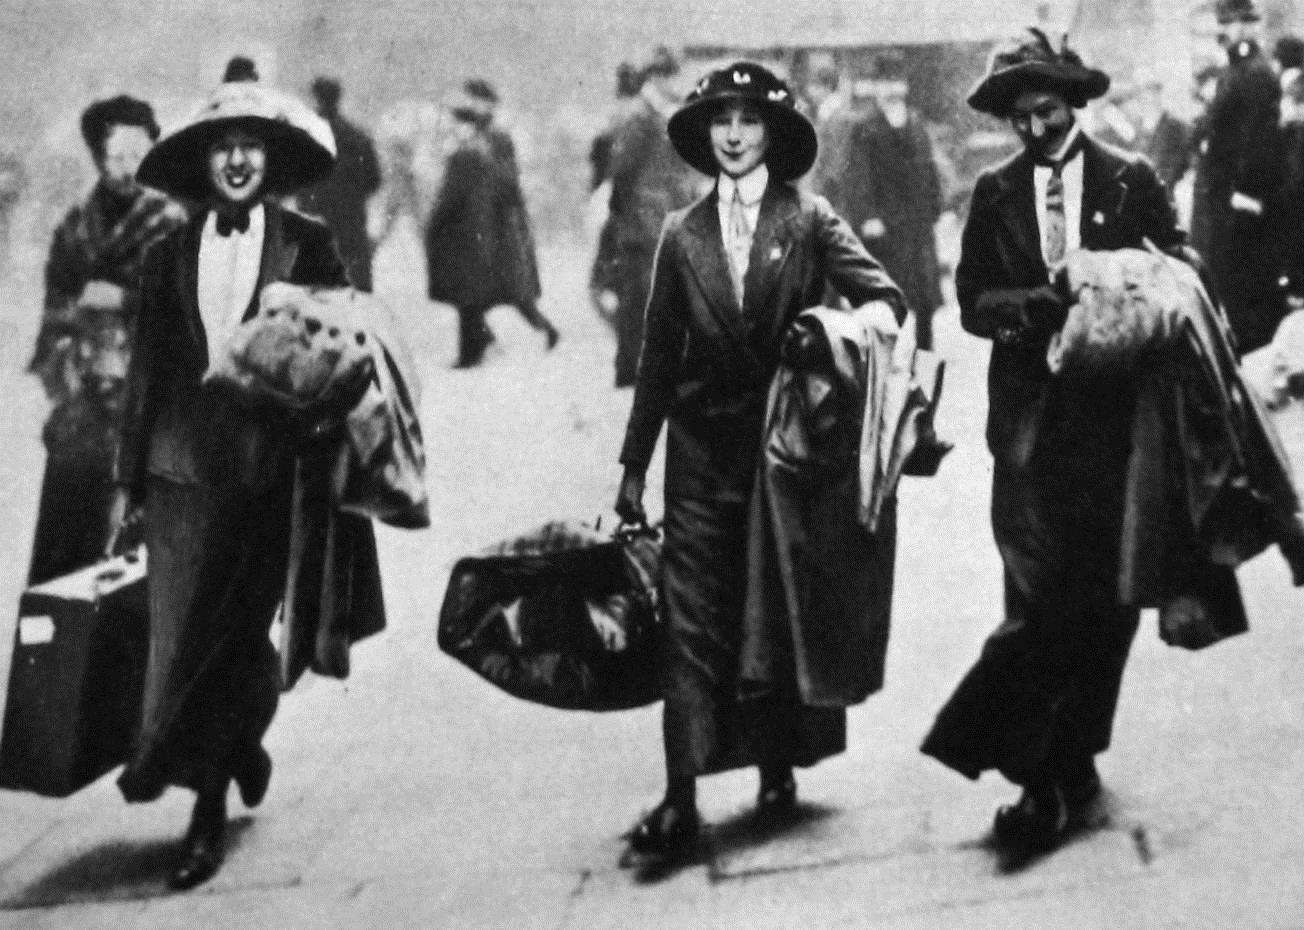 Today marks 100 years since women over 30 could vote